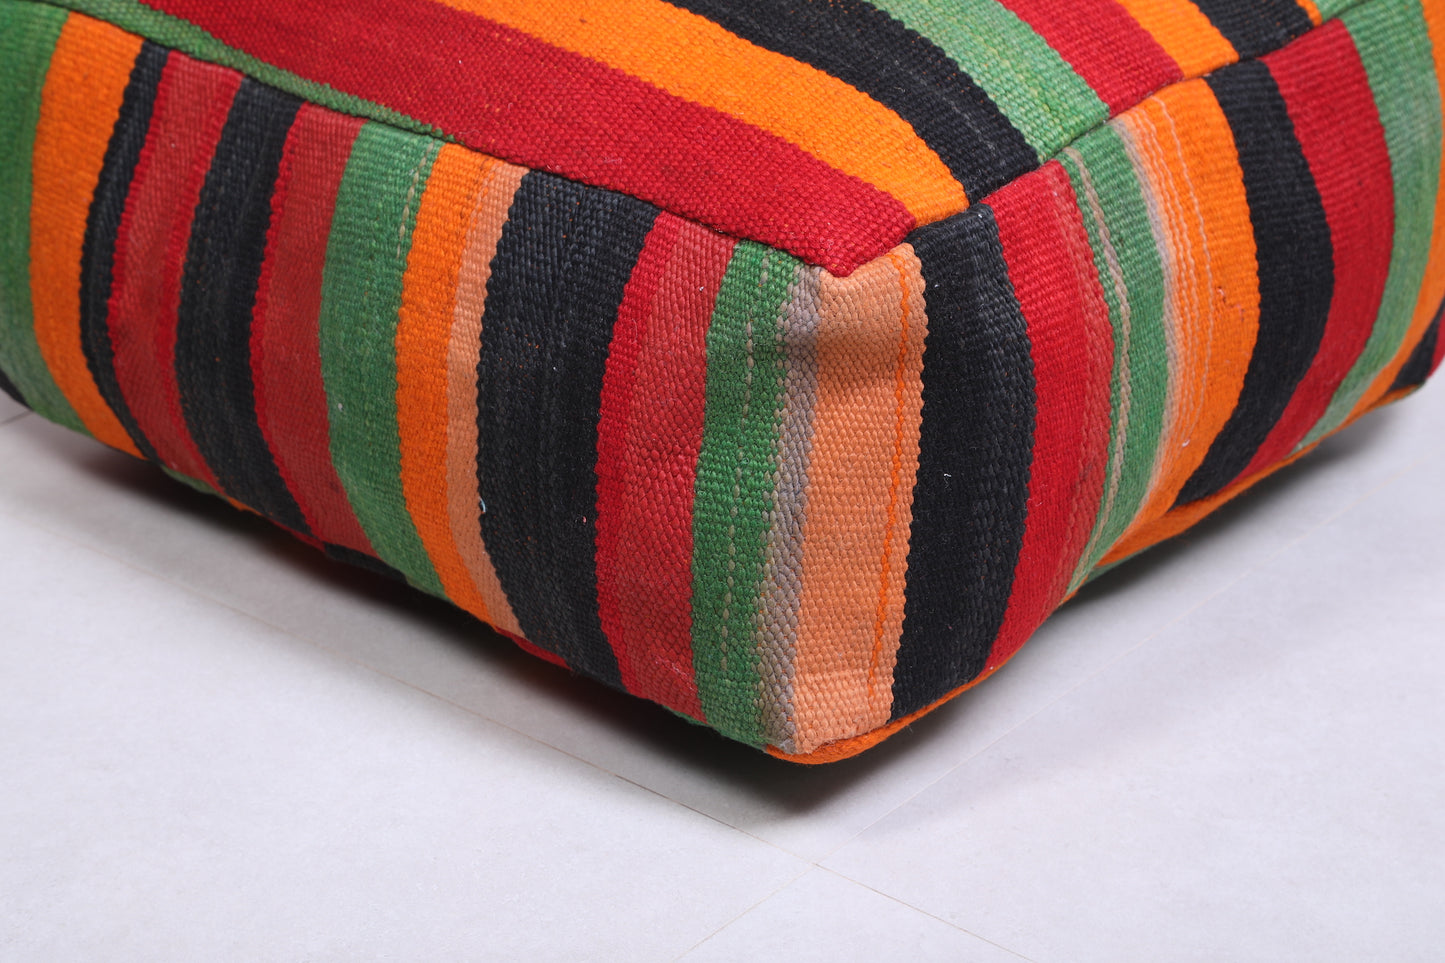 Two Moroccan colorful handmade poufs for sale